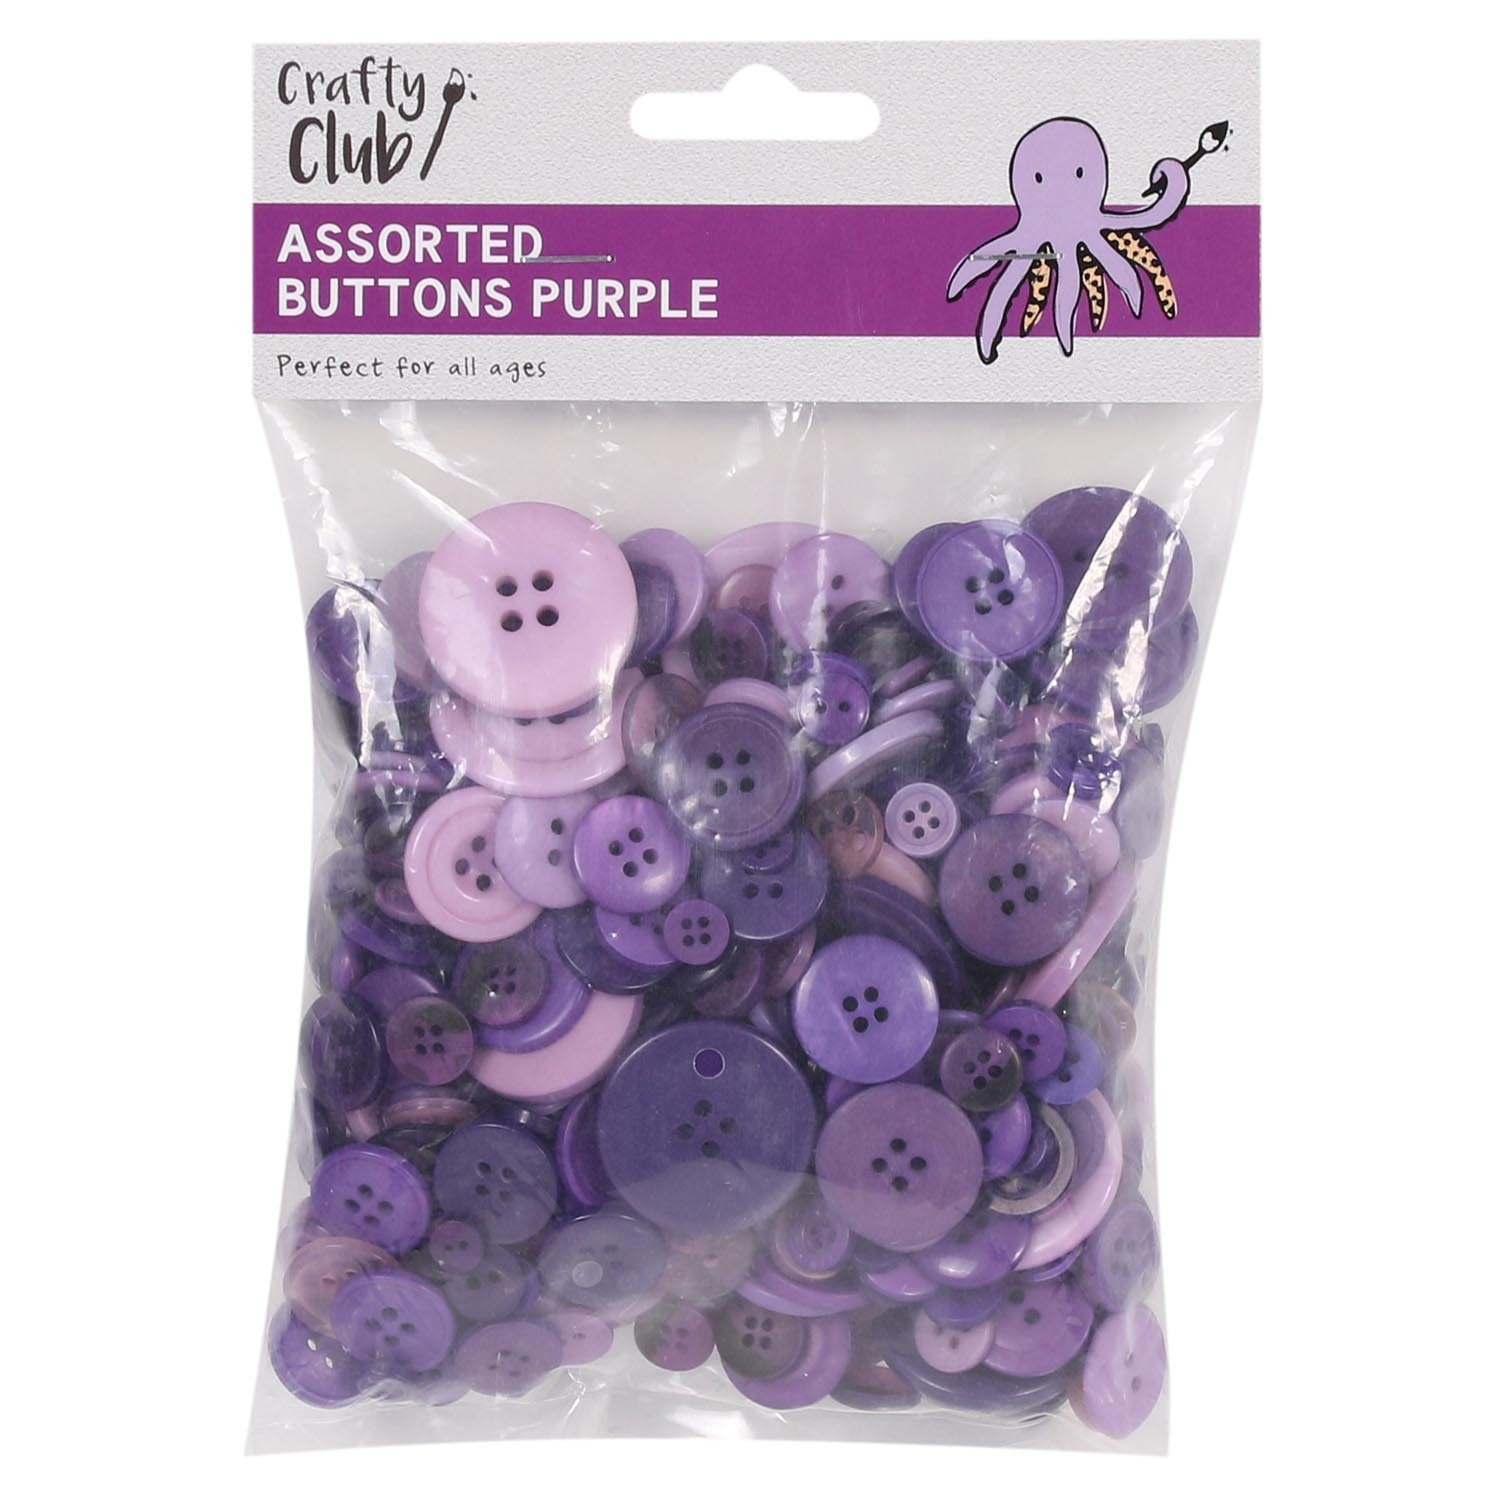 Crafty Club Assorted Buttons - Purple Image